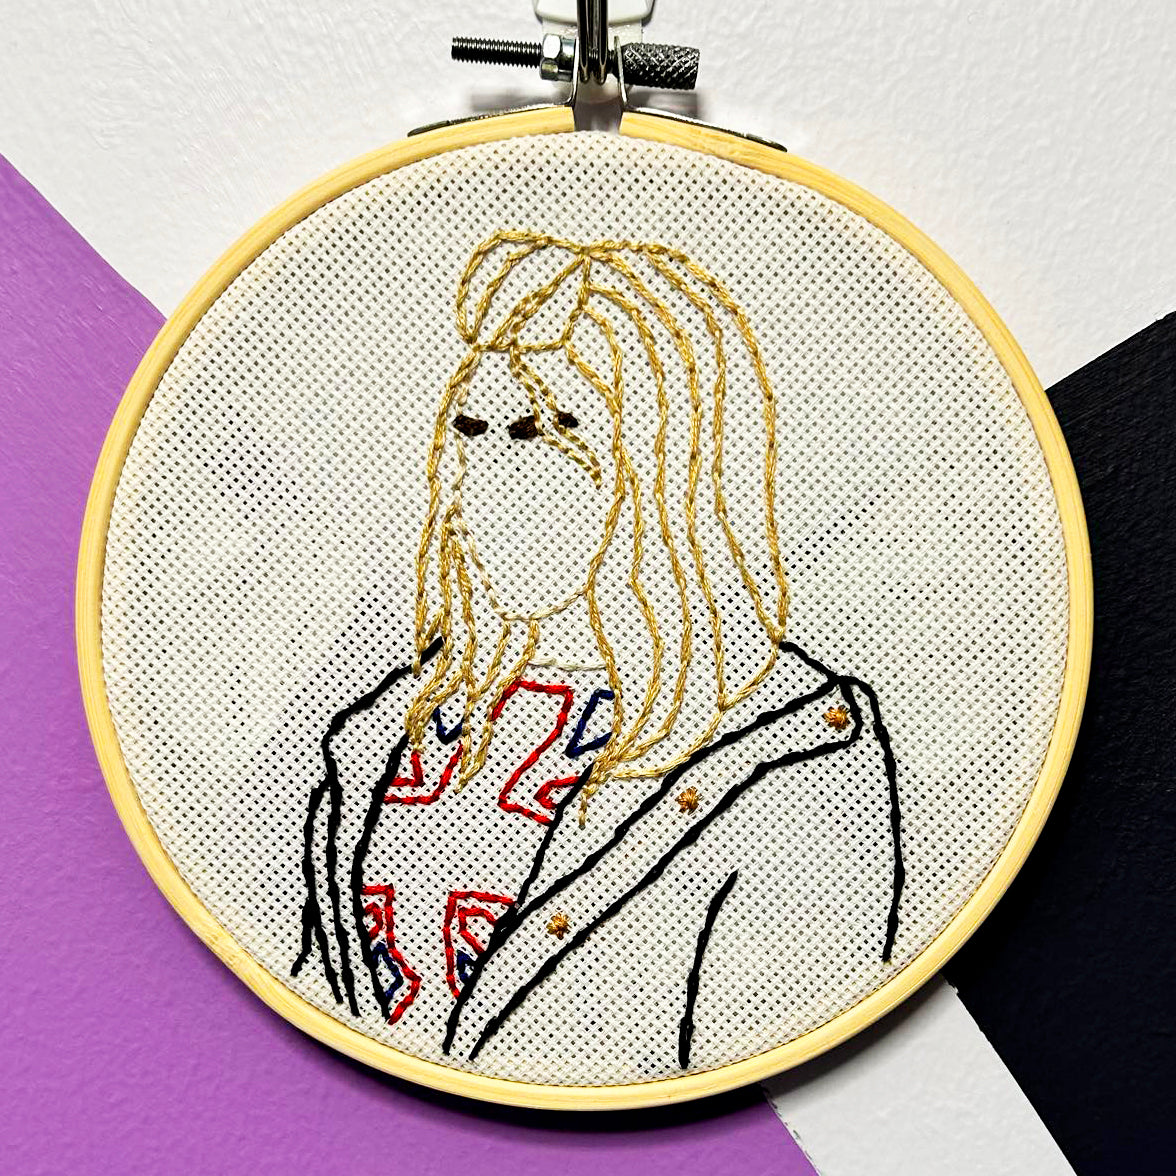 Doctor Who embroidery